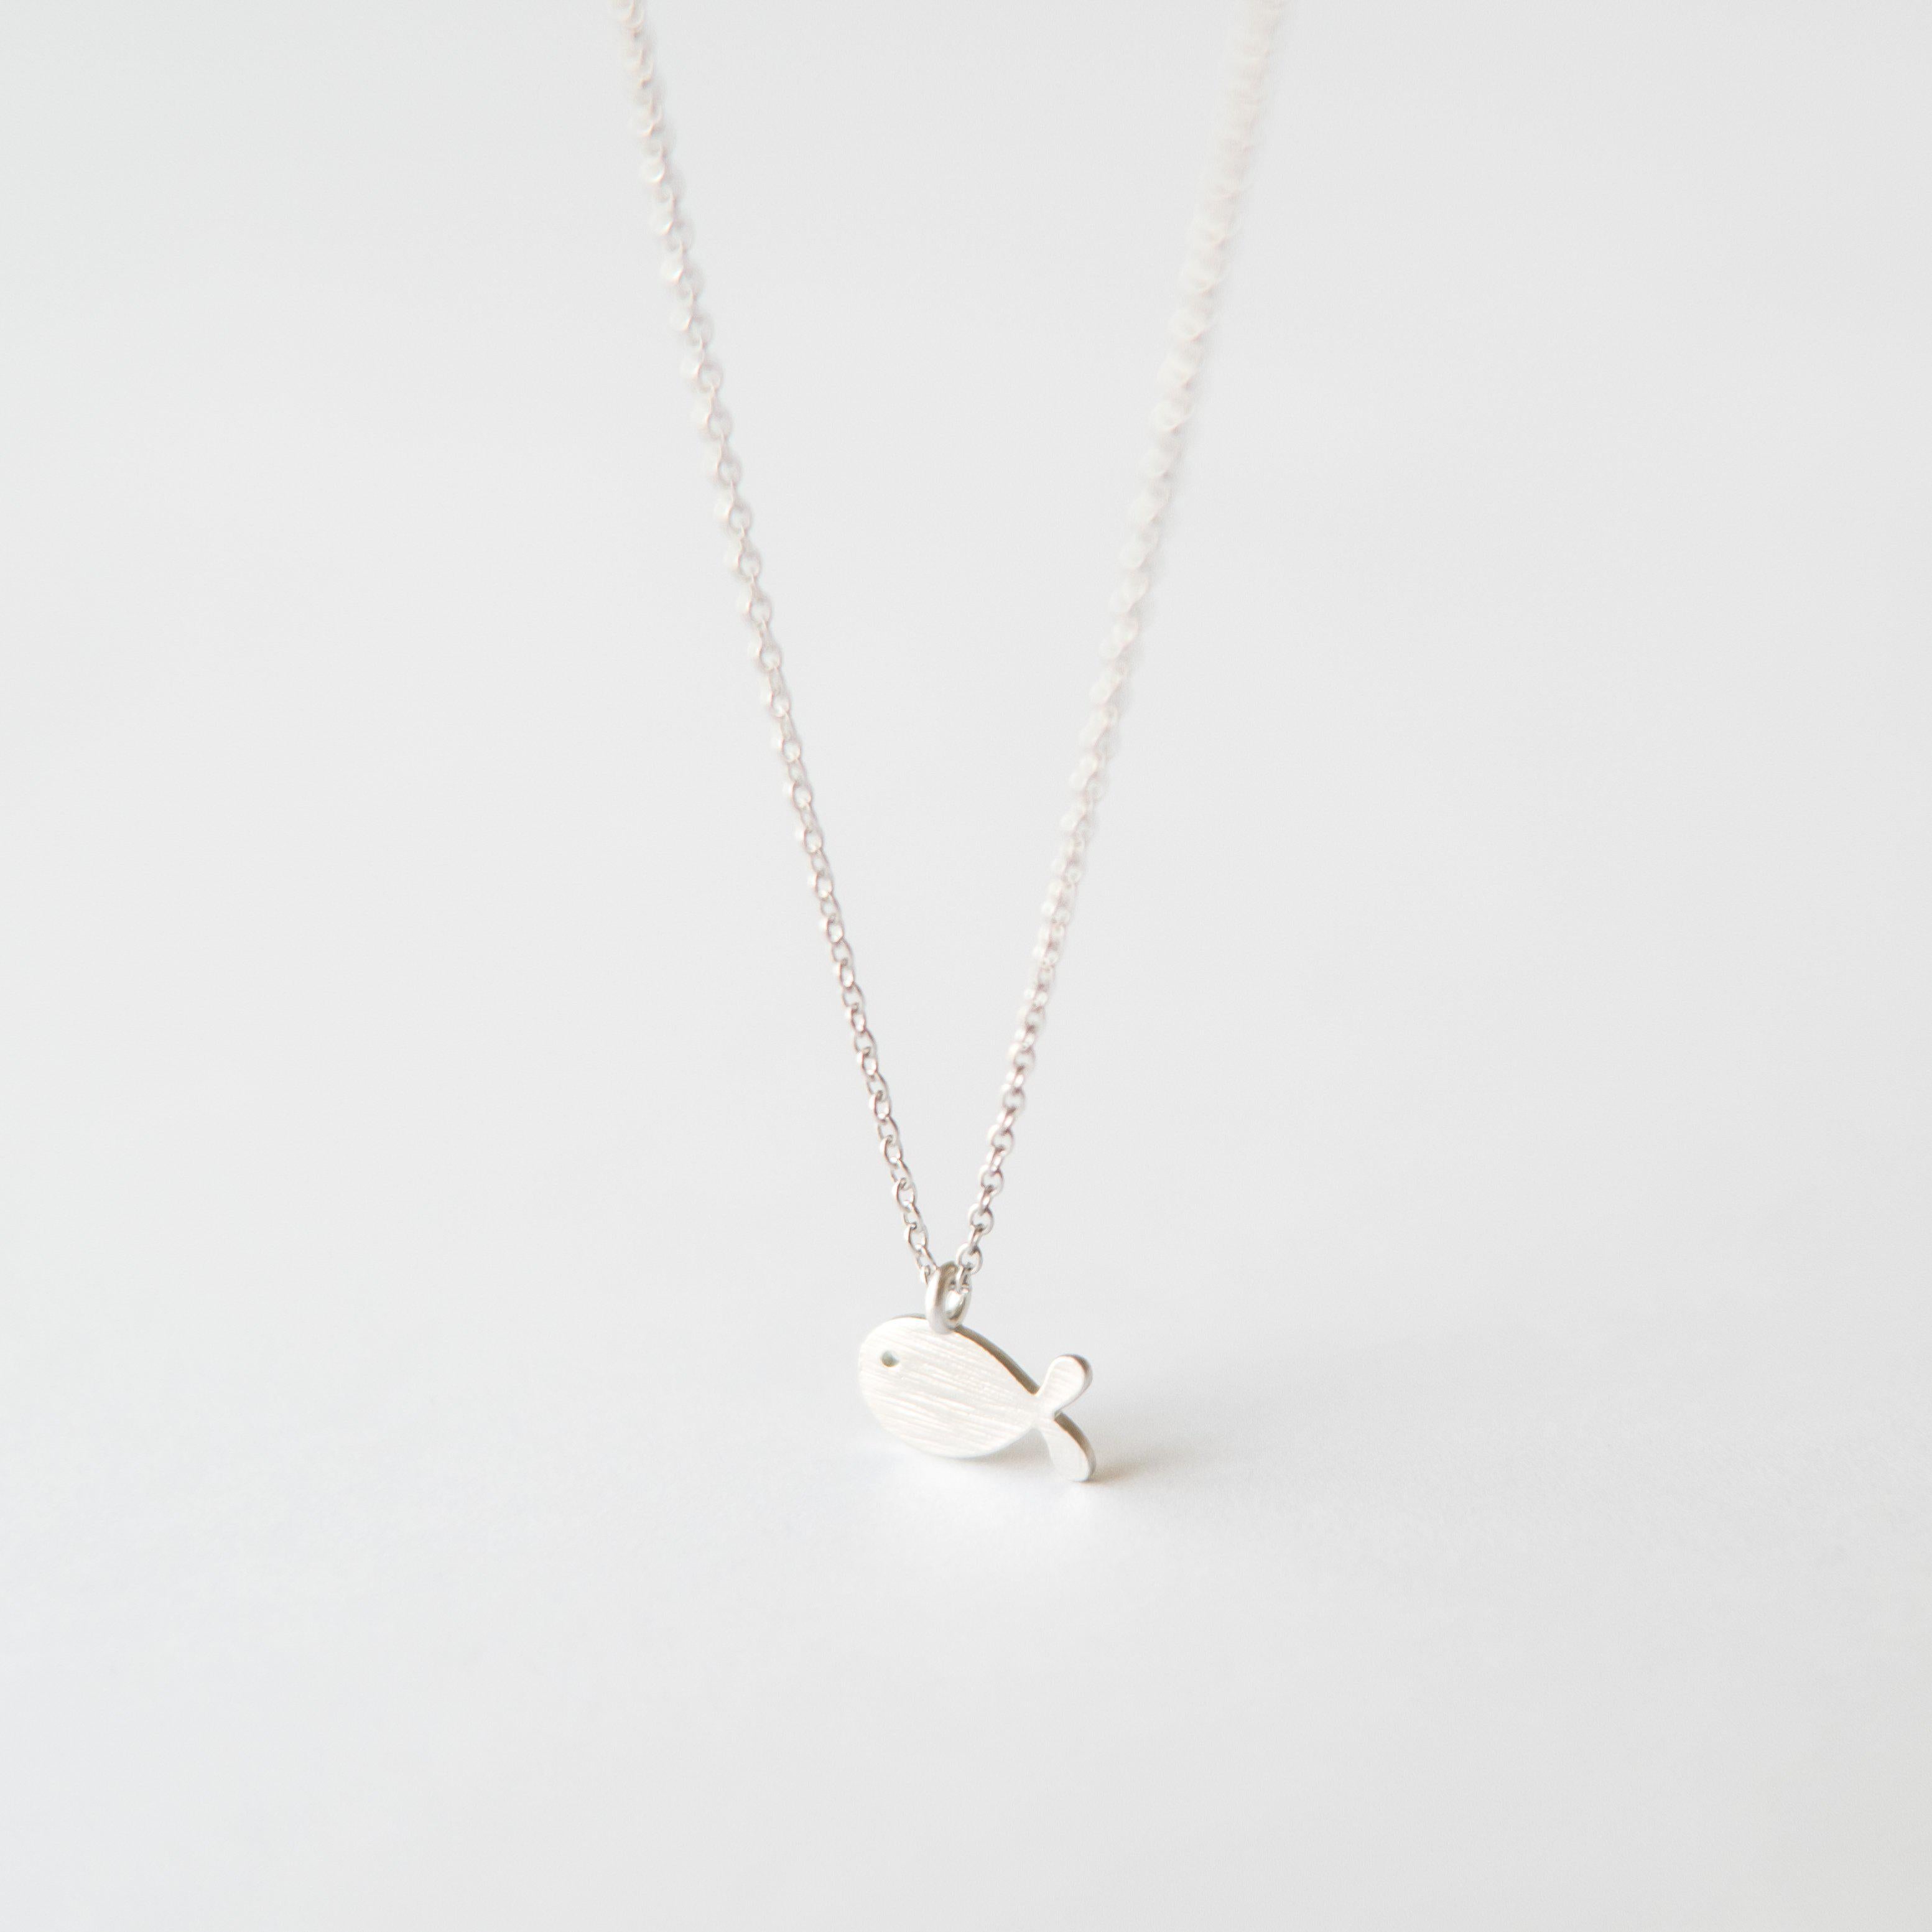 Silver Fish Necklace